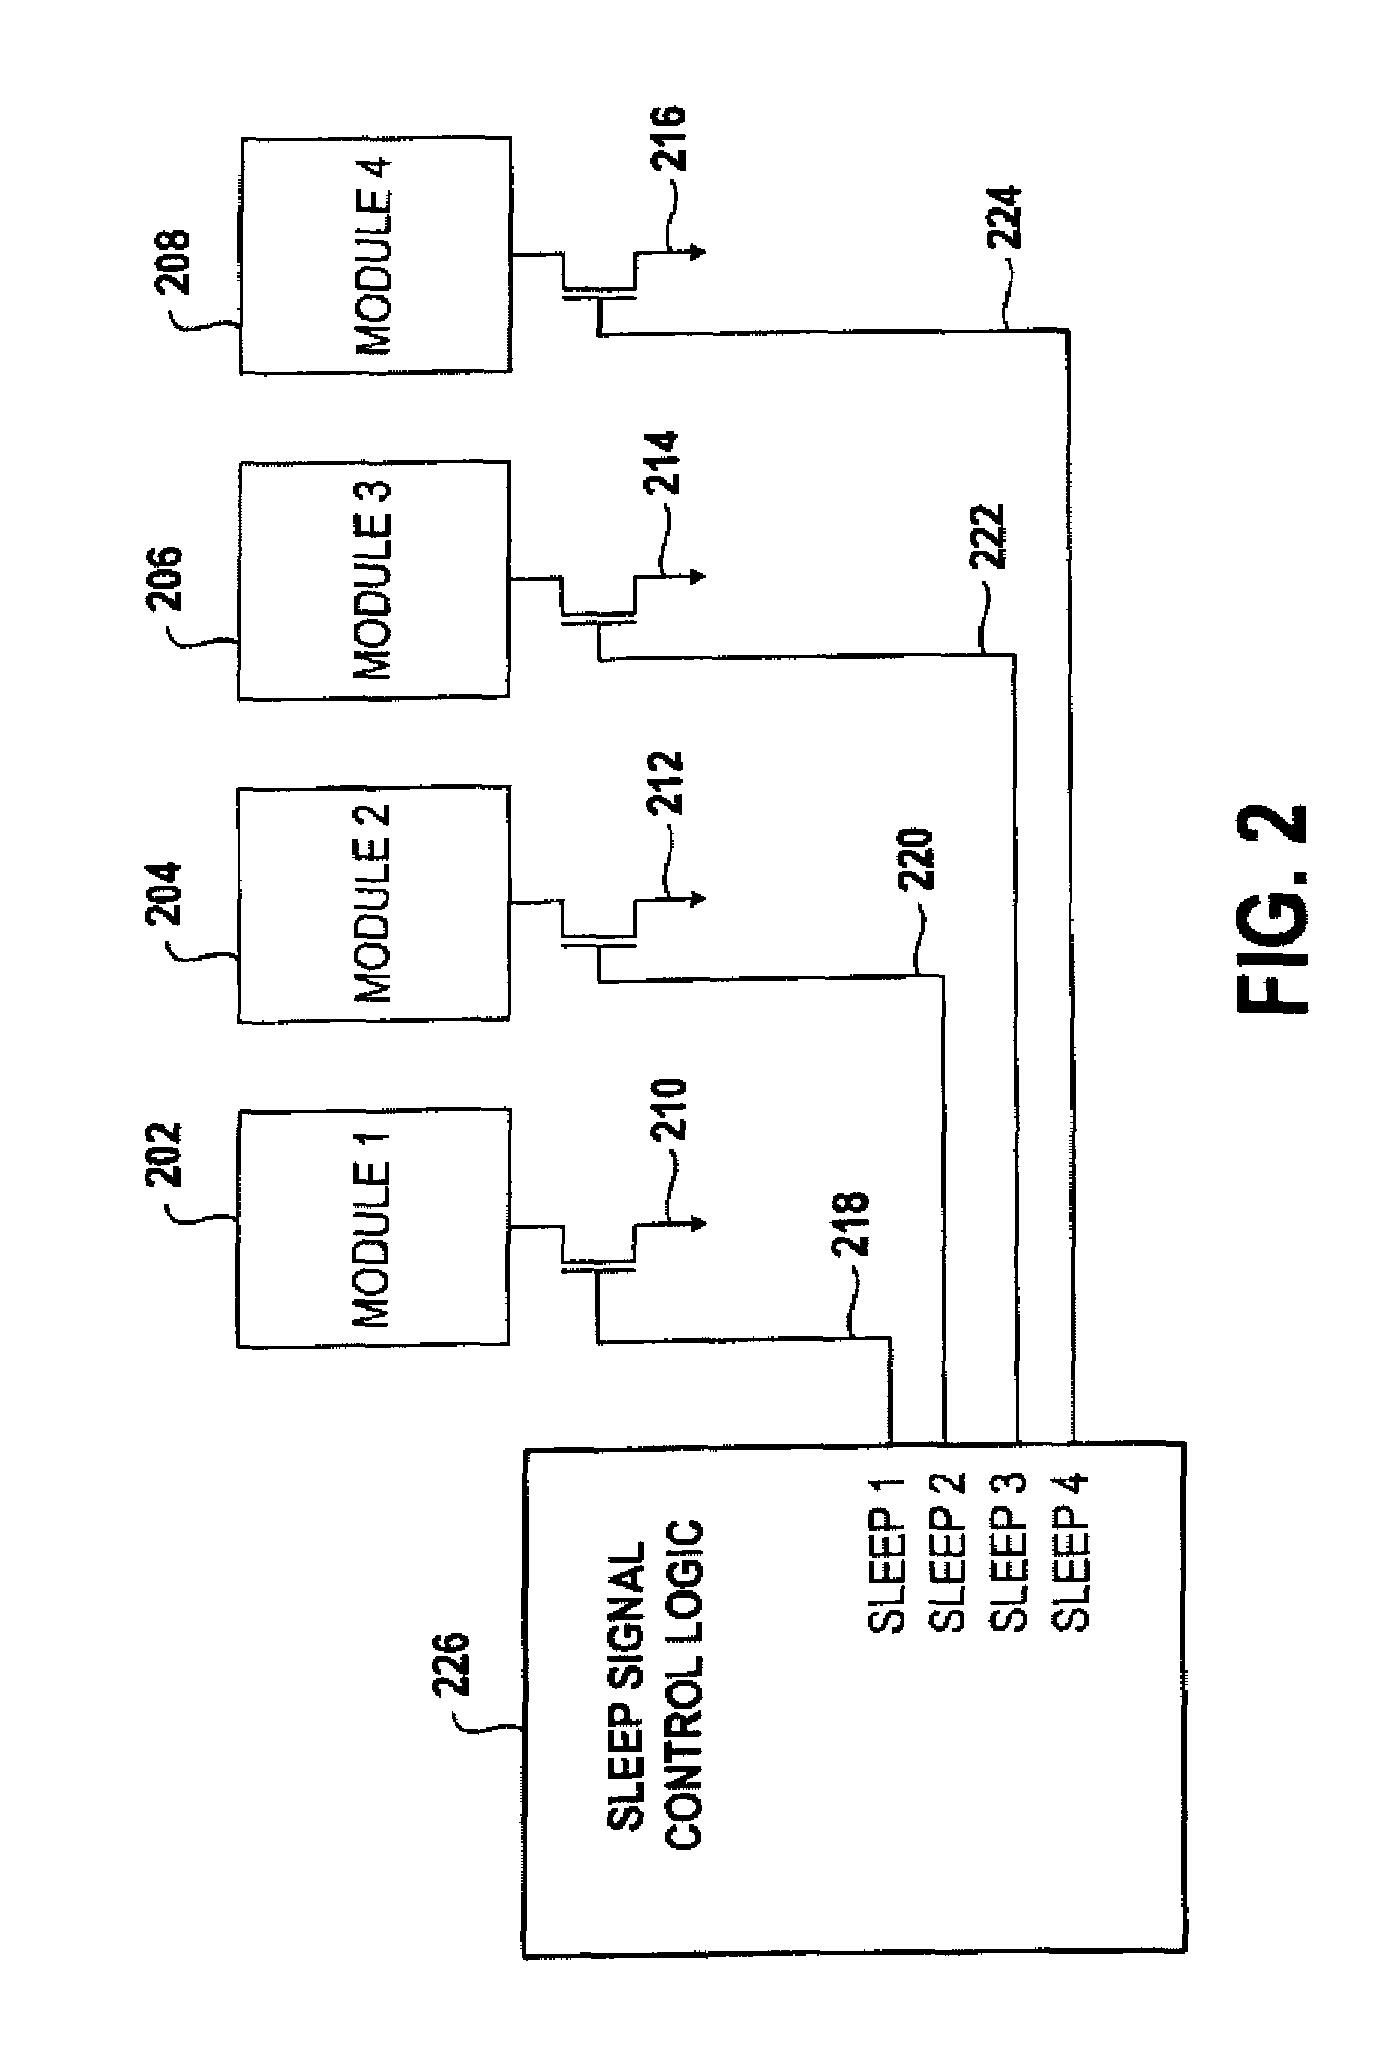 Method of reducing leakage current using sleep transistors in programmable logic device